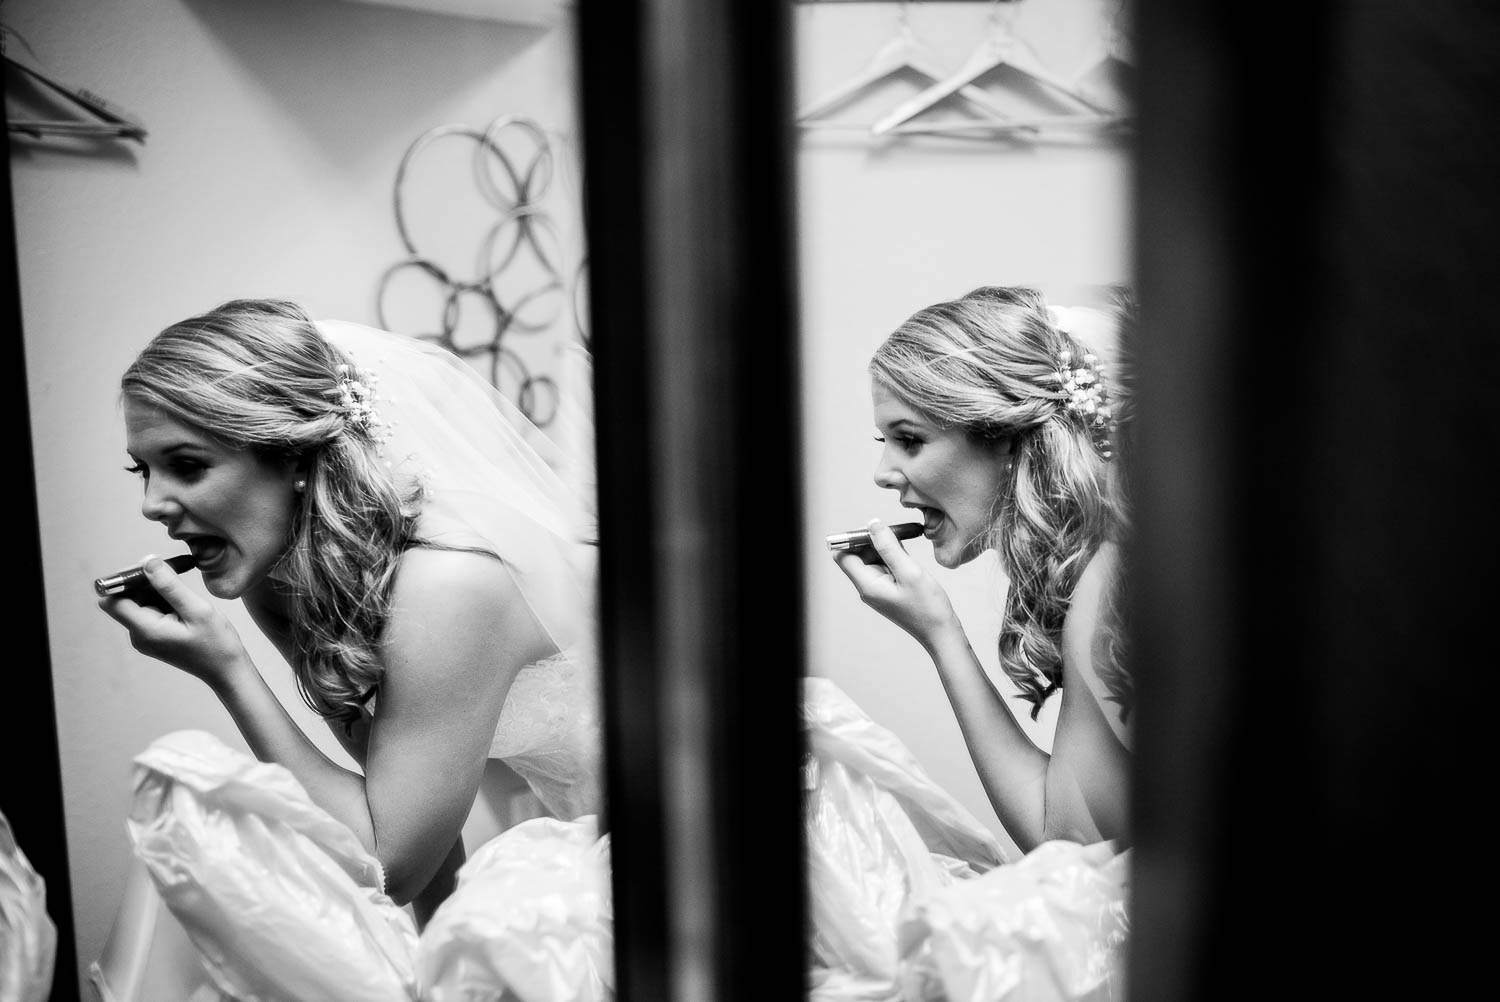 Brdie applies makeup in a double mirror at the-lyceum-wedding-leica-wedding-photographer-philip-thomas-020